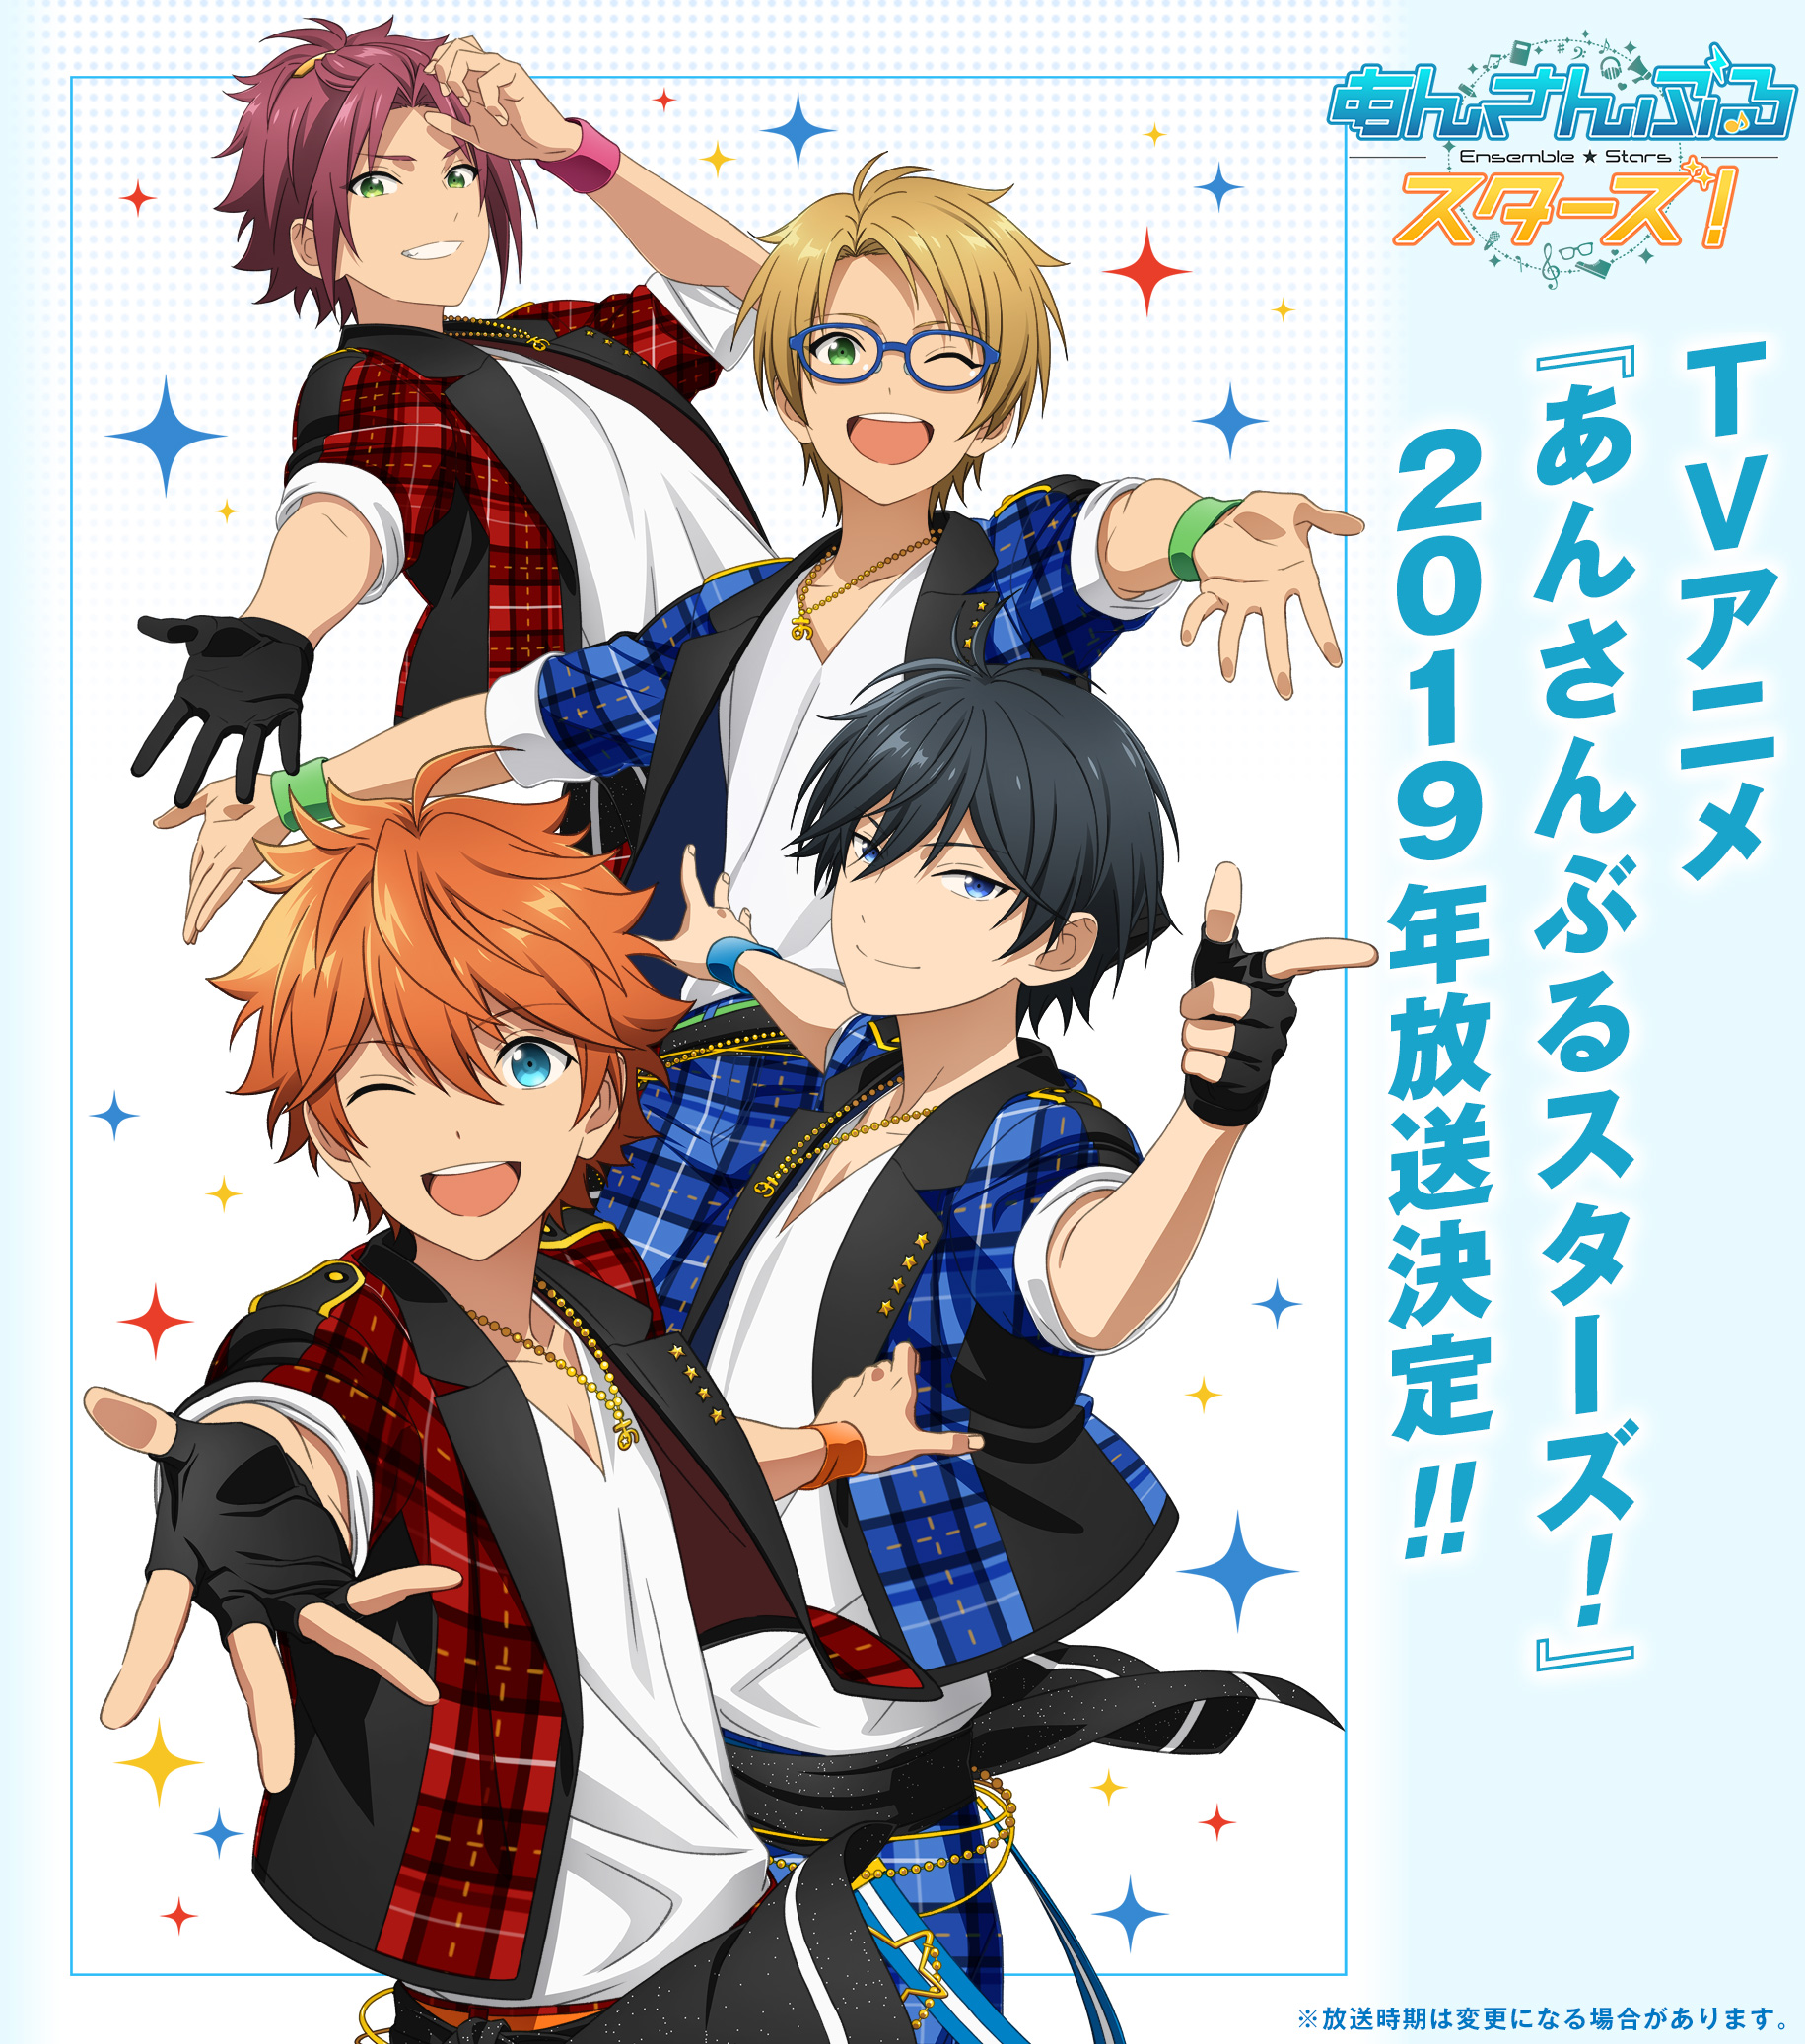 New Ensemble Stars!! -Road to Show!!- Trailer Previews Theme Song